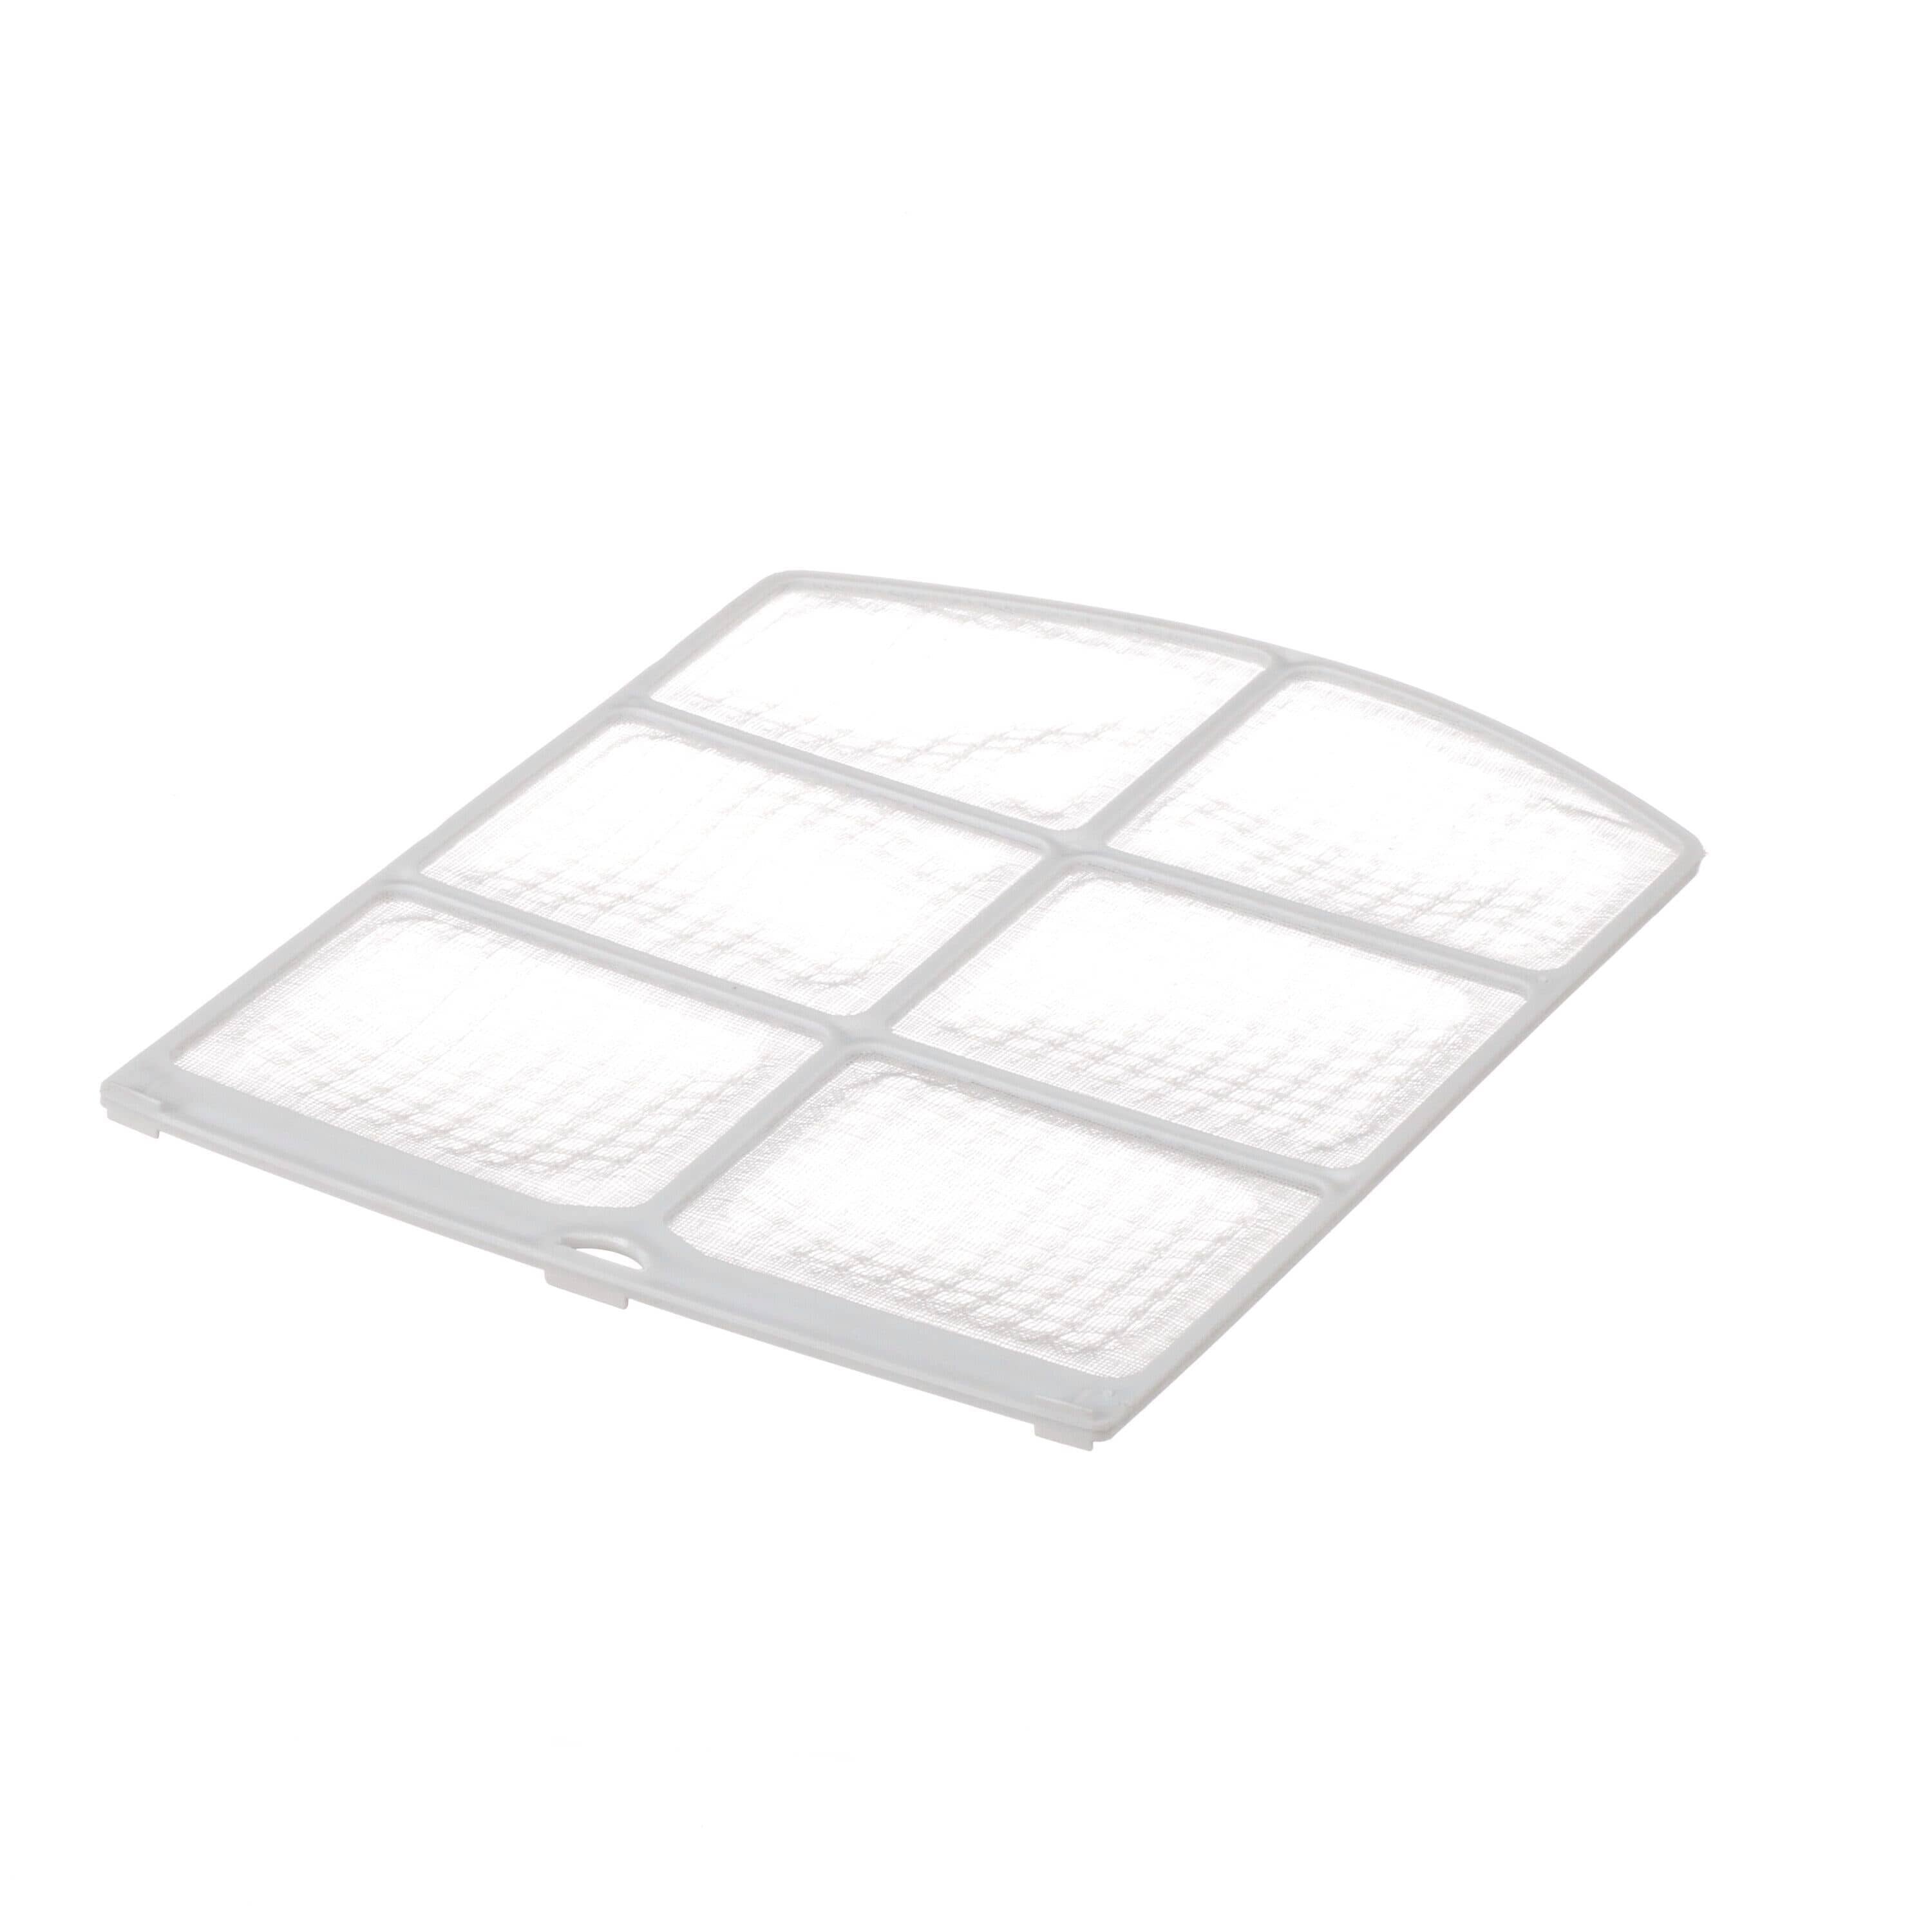 LG COV30332815 Air Conditioner Air Filter, Outsourcing